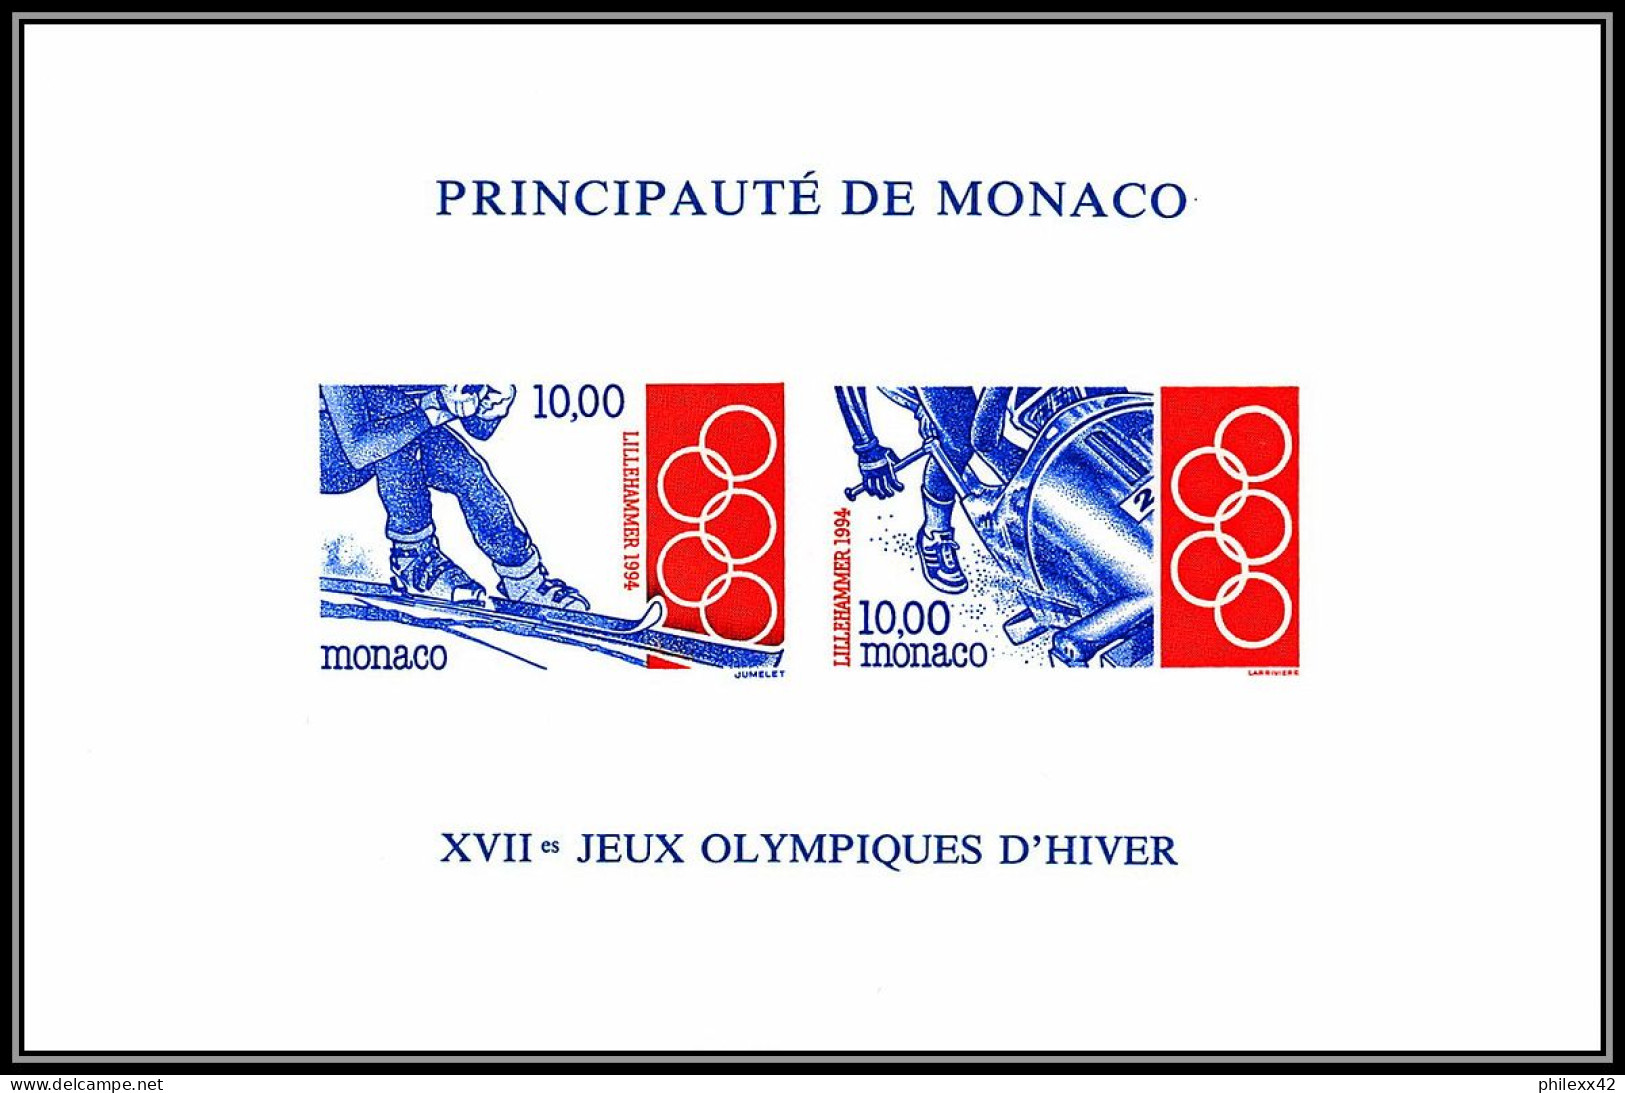 85264 Bloc Collectif BF N°63 Lillehammer 1994 Jeux Olympiques (olympic Games) Monaco Non Dentelé ** MNH Imperf - Invierno 1994: Lillehammer